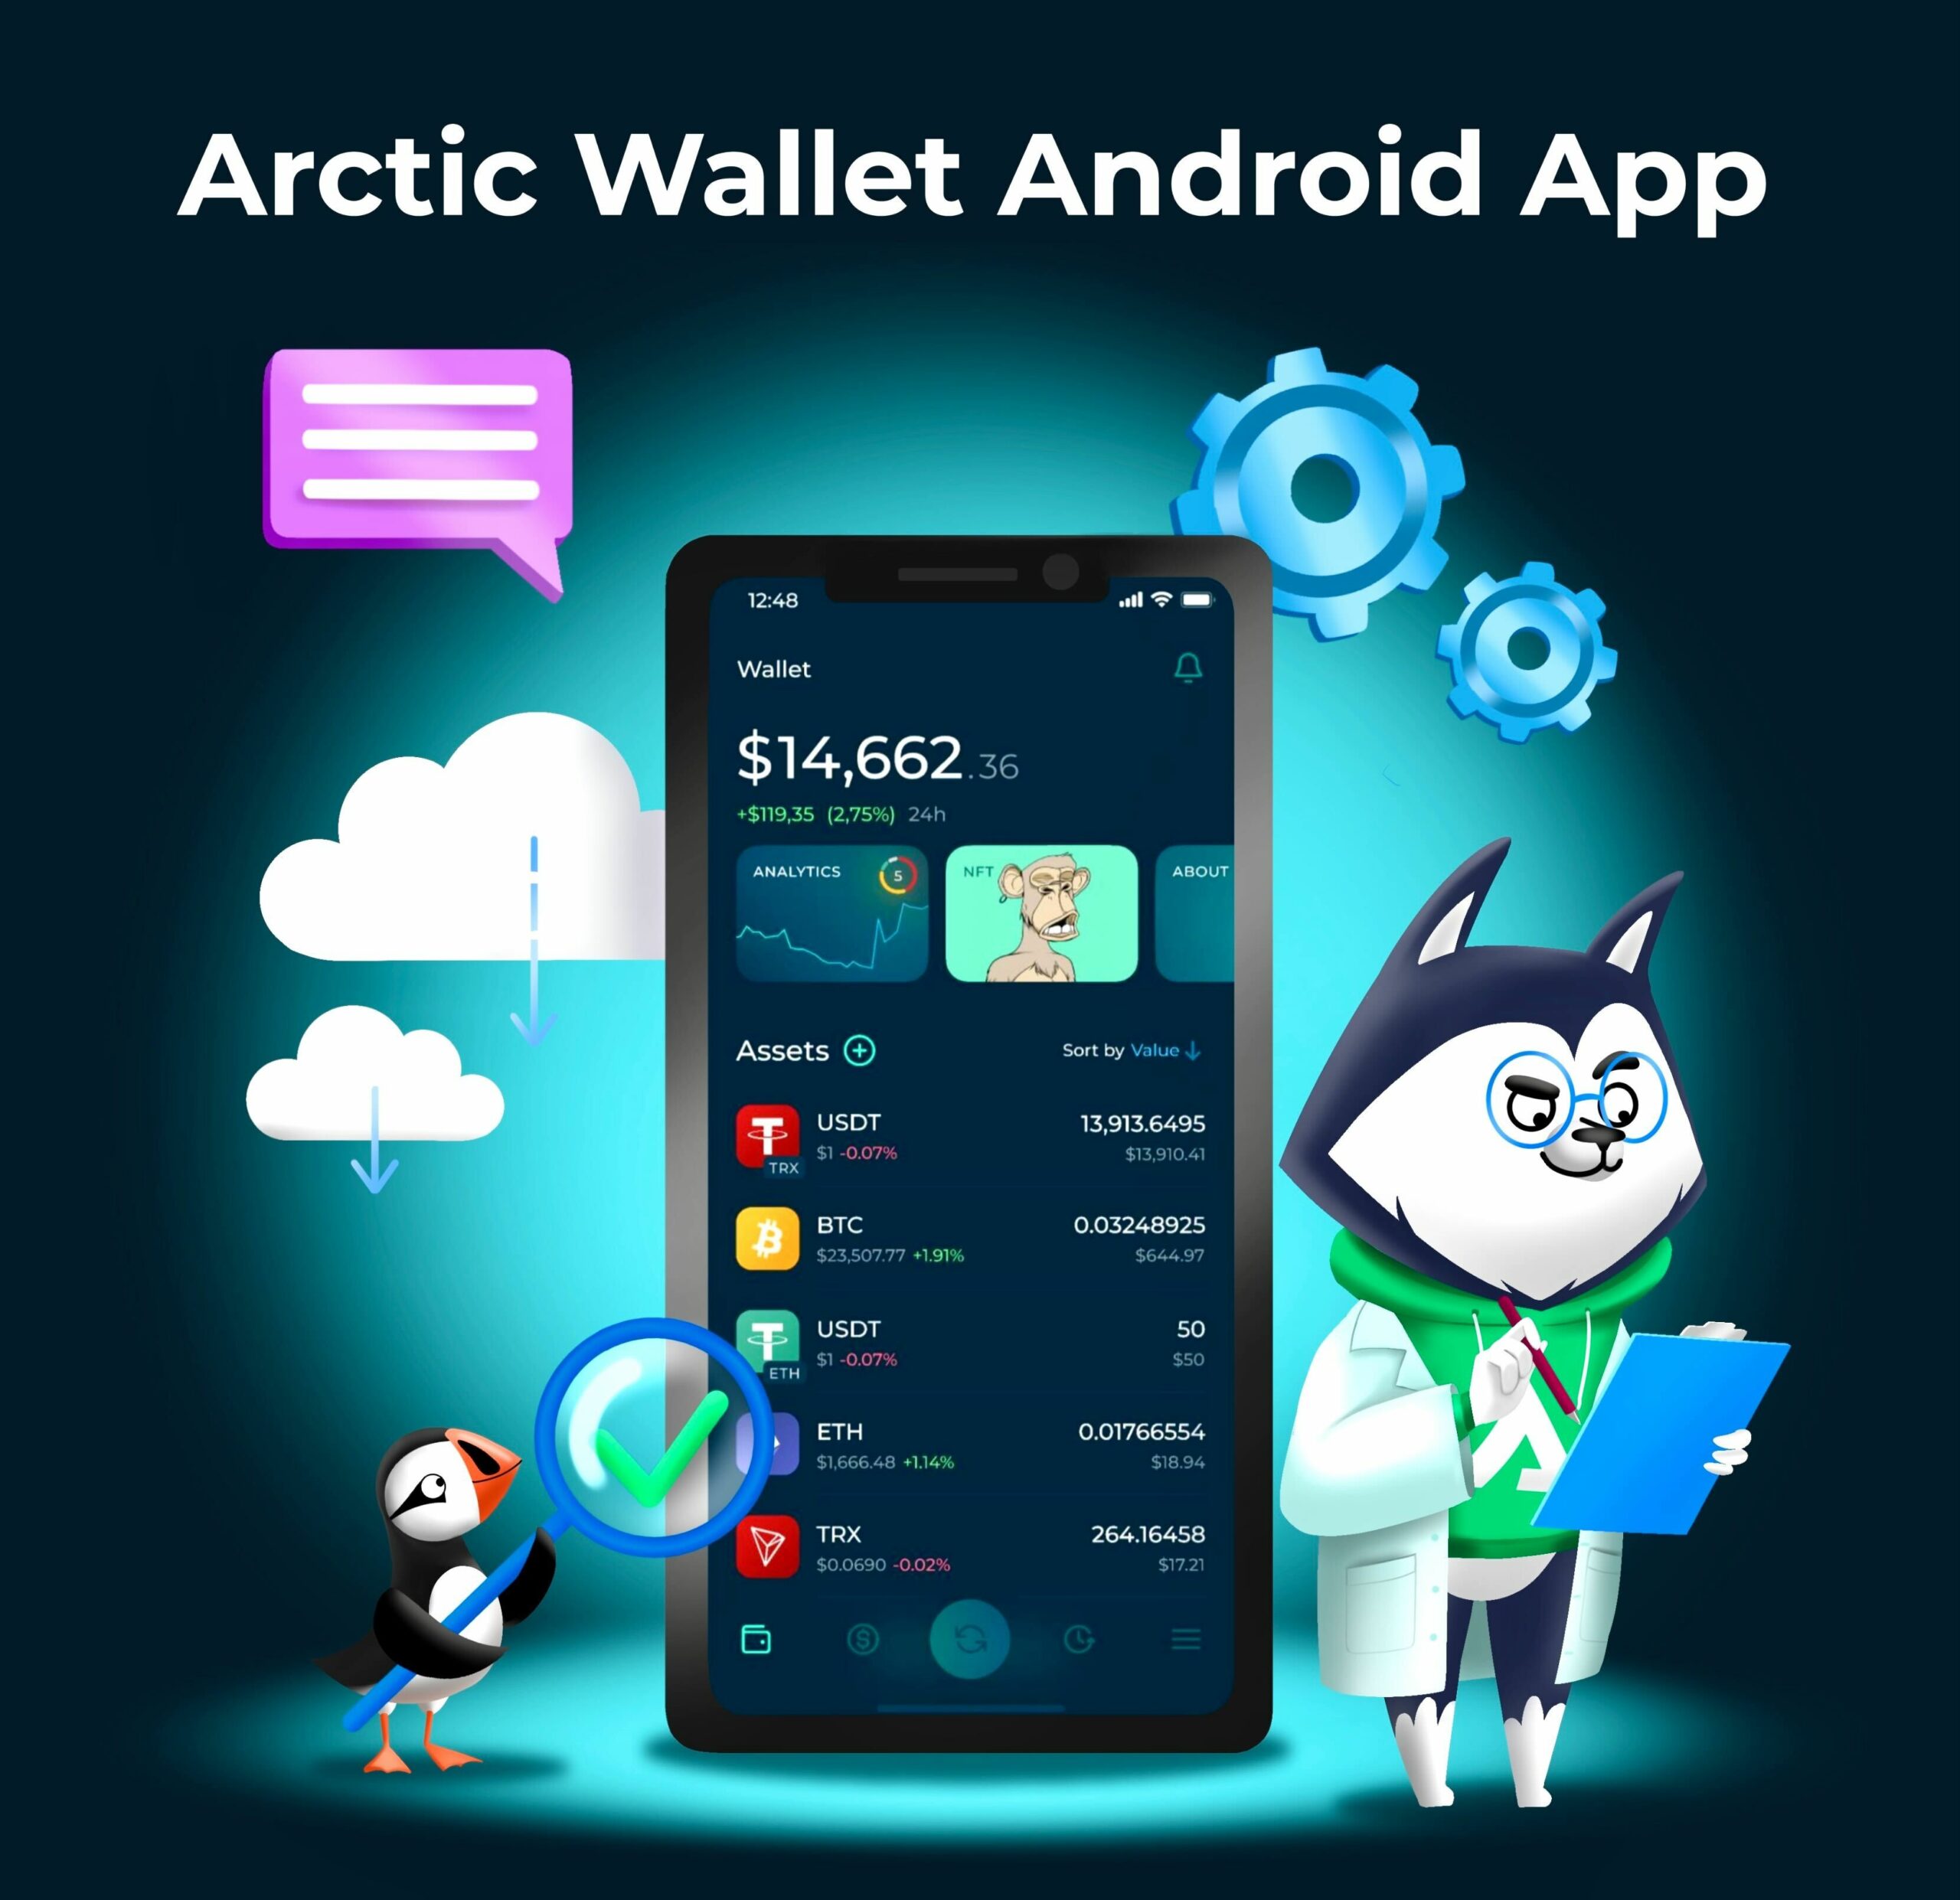 , A non-custodial Arctic Wallet is now available for Android